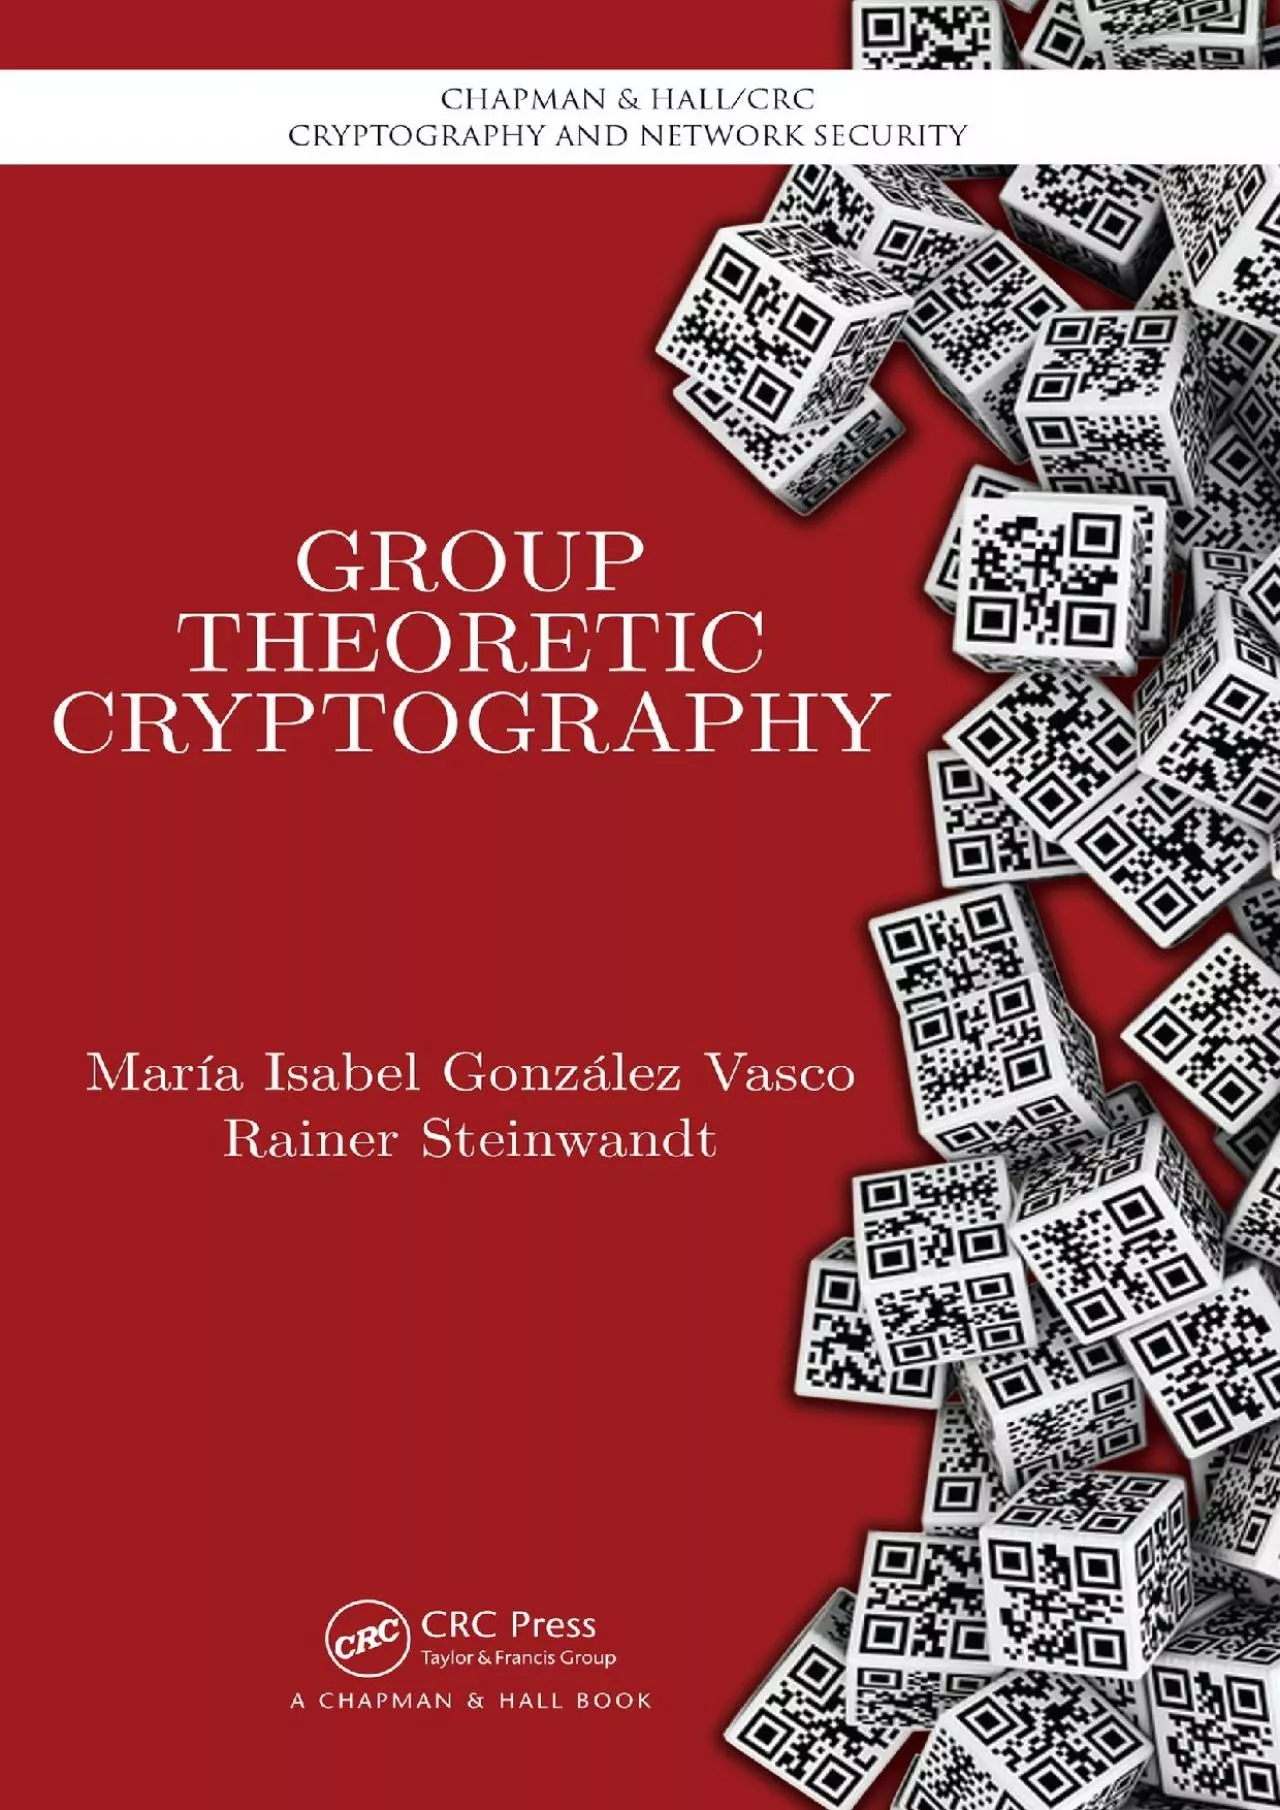 (BOOK)-Group Theoretic Cryptography (Chapman  Hall/CRC Cryptography and Network Security